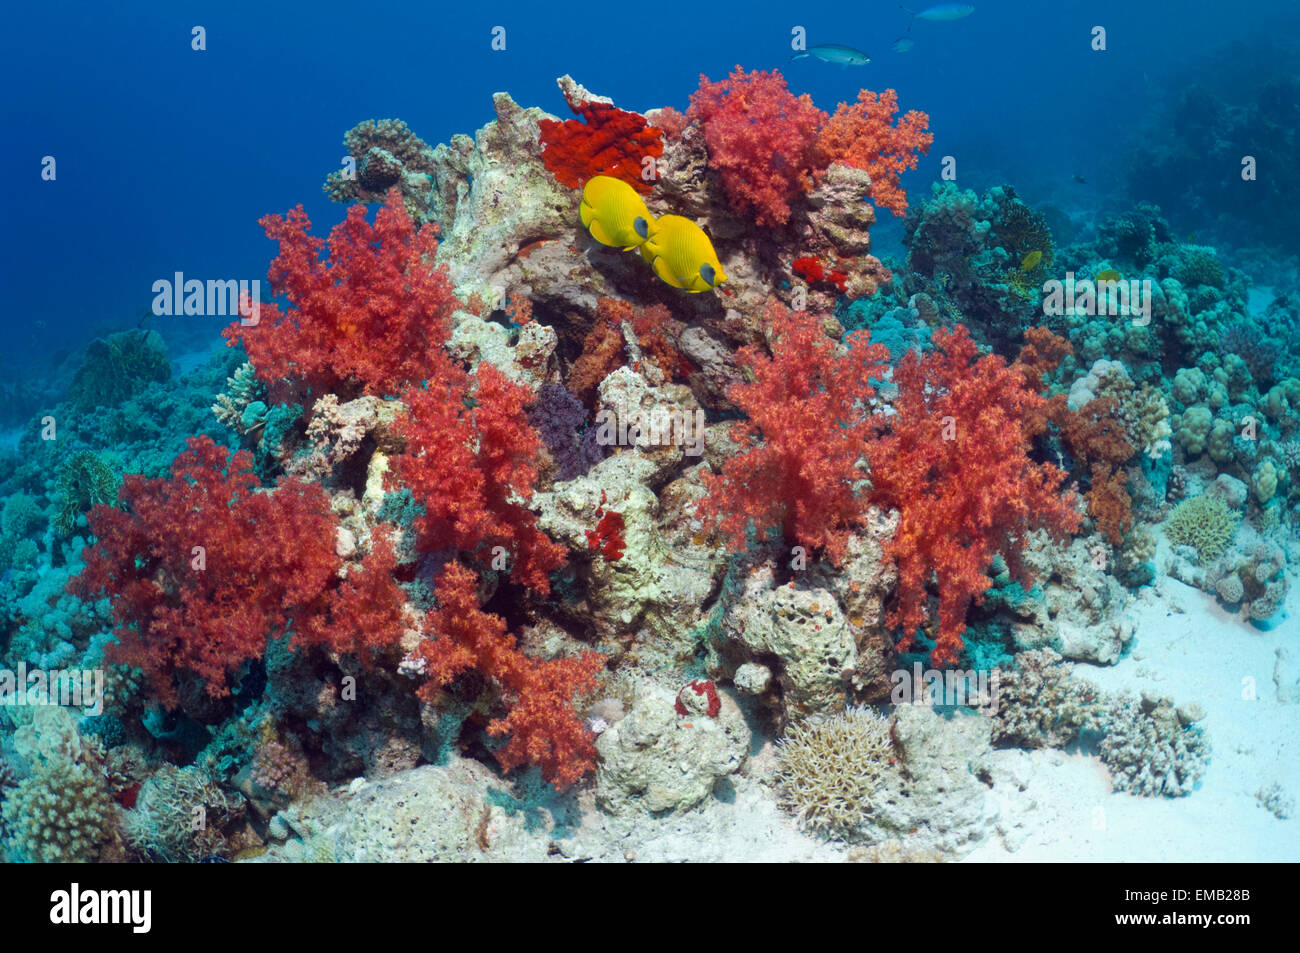 Golden butterflyfish (Chaetodon semilarvatus) with soft corals (Dendronephthya sp) on coral reef.  Egypt, Red Sea. Stock Photo